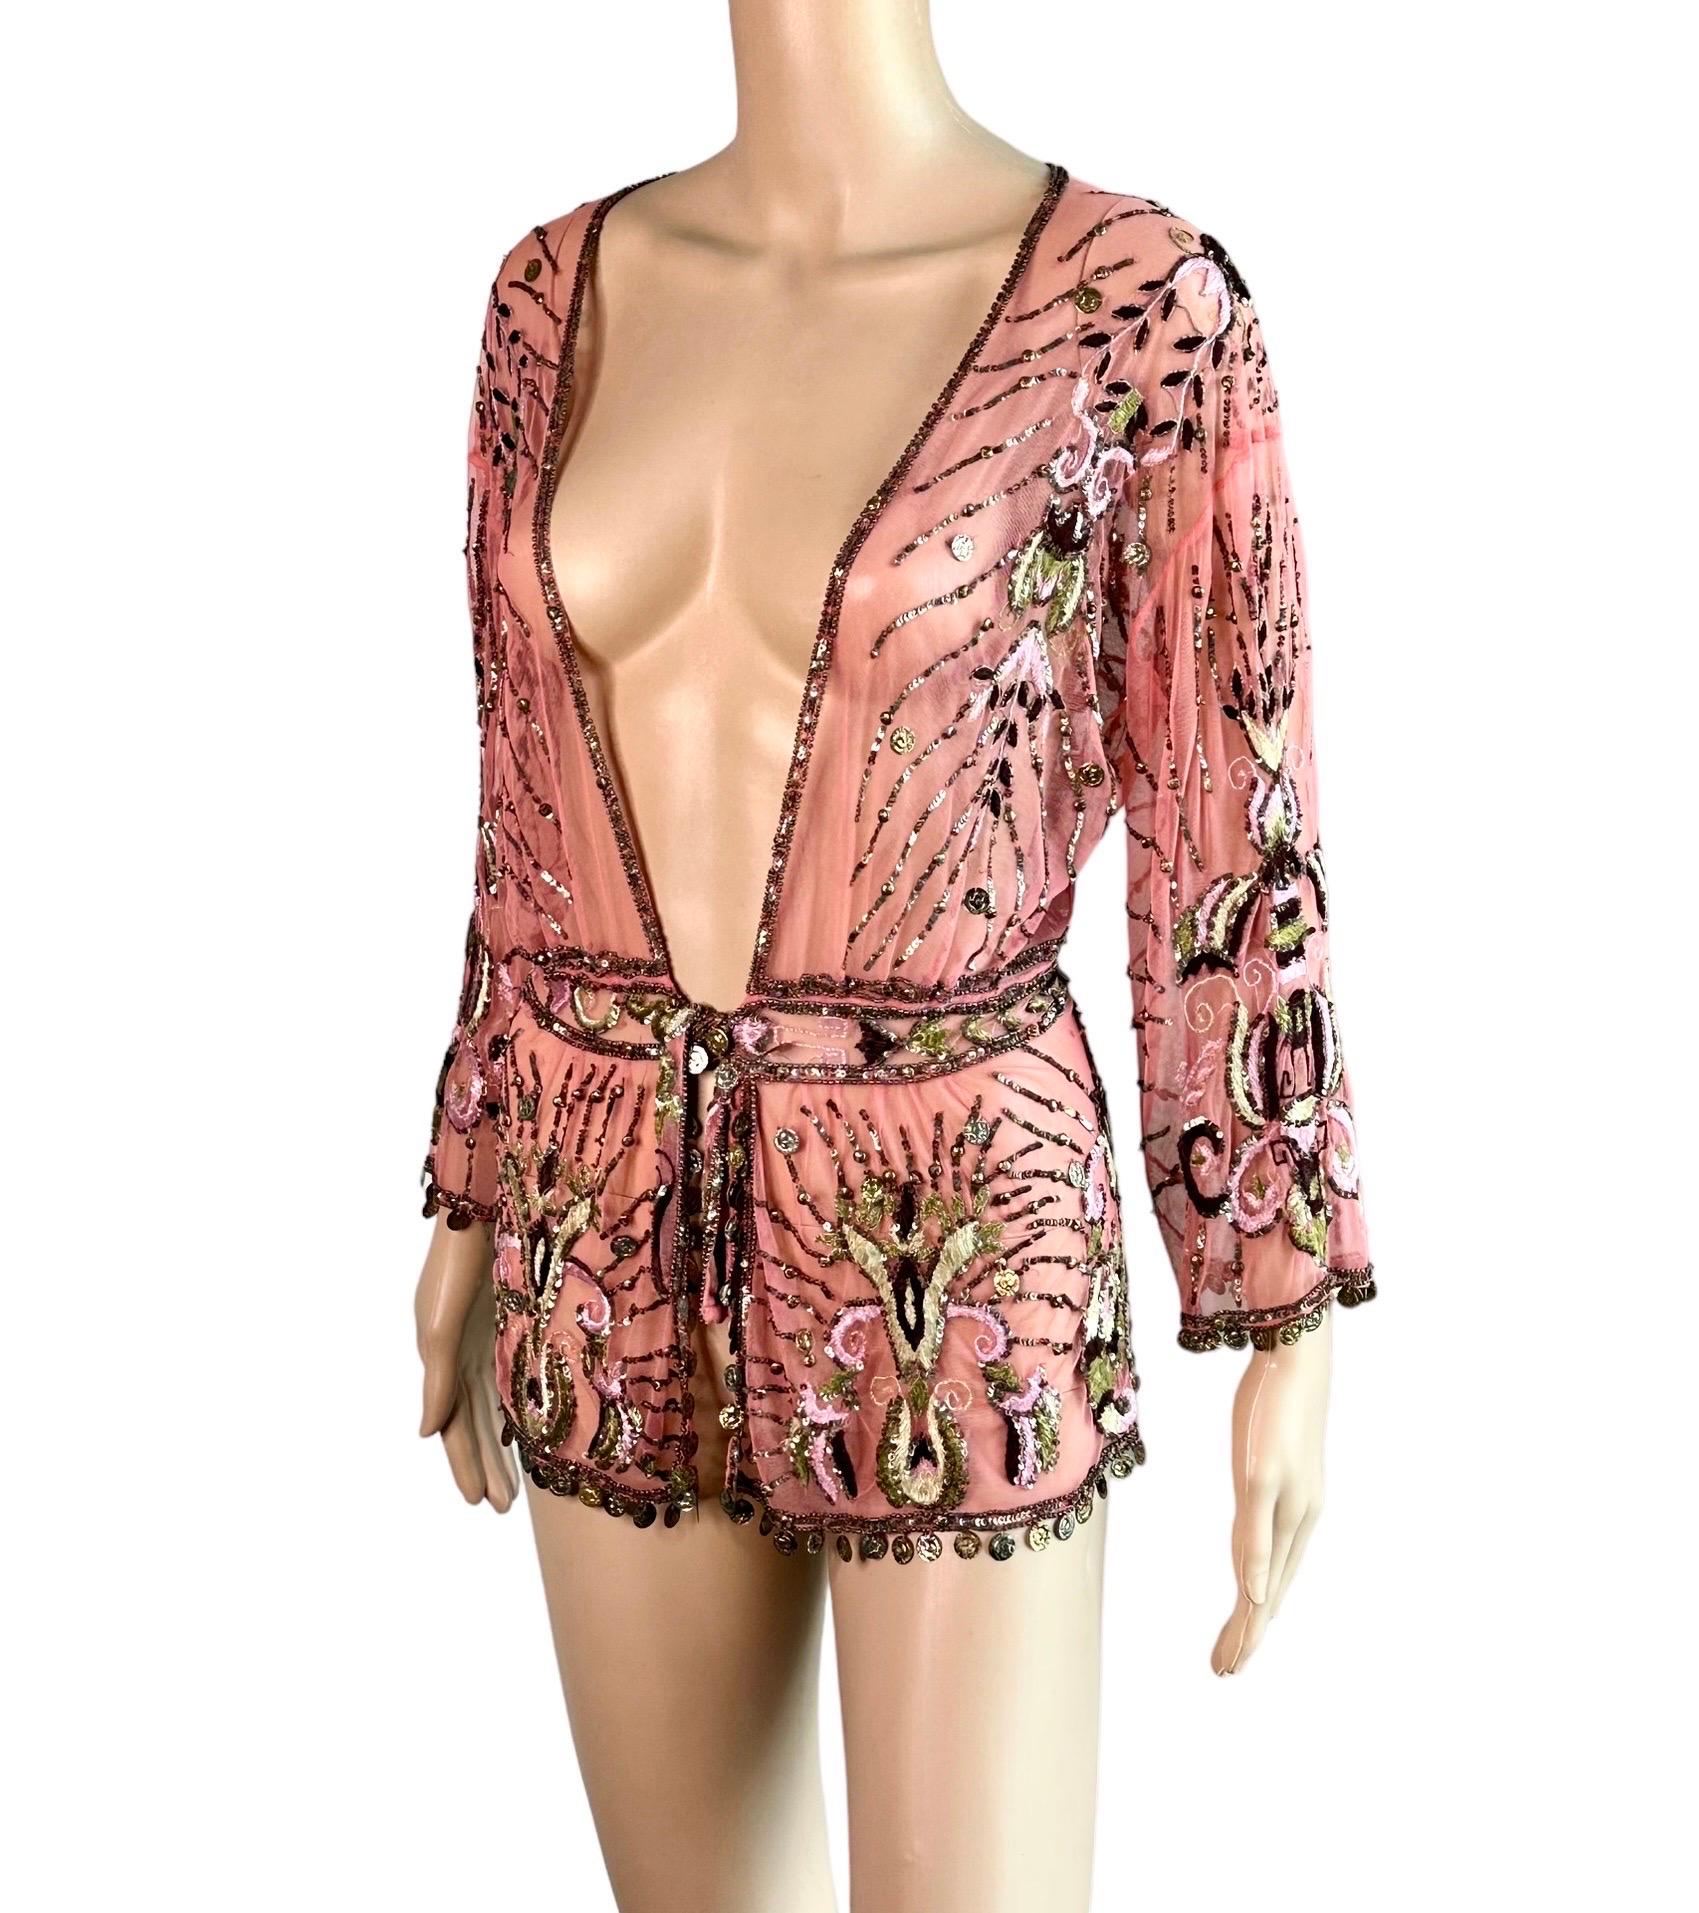 Roberto Cavalli S/S 2005 Embellished Sheer Mesh Embroidered Cardigan Jacket Top In Good Condition In Naples, FL